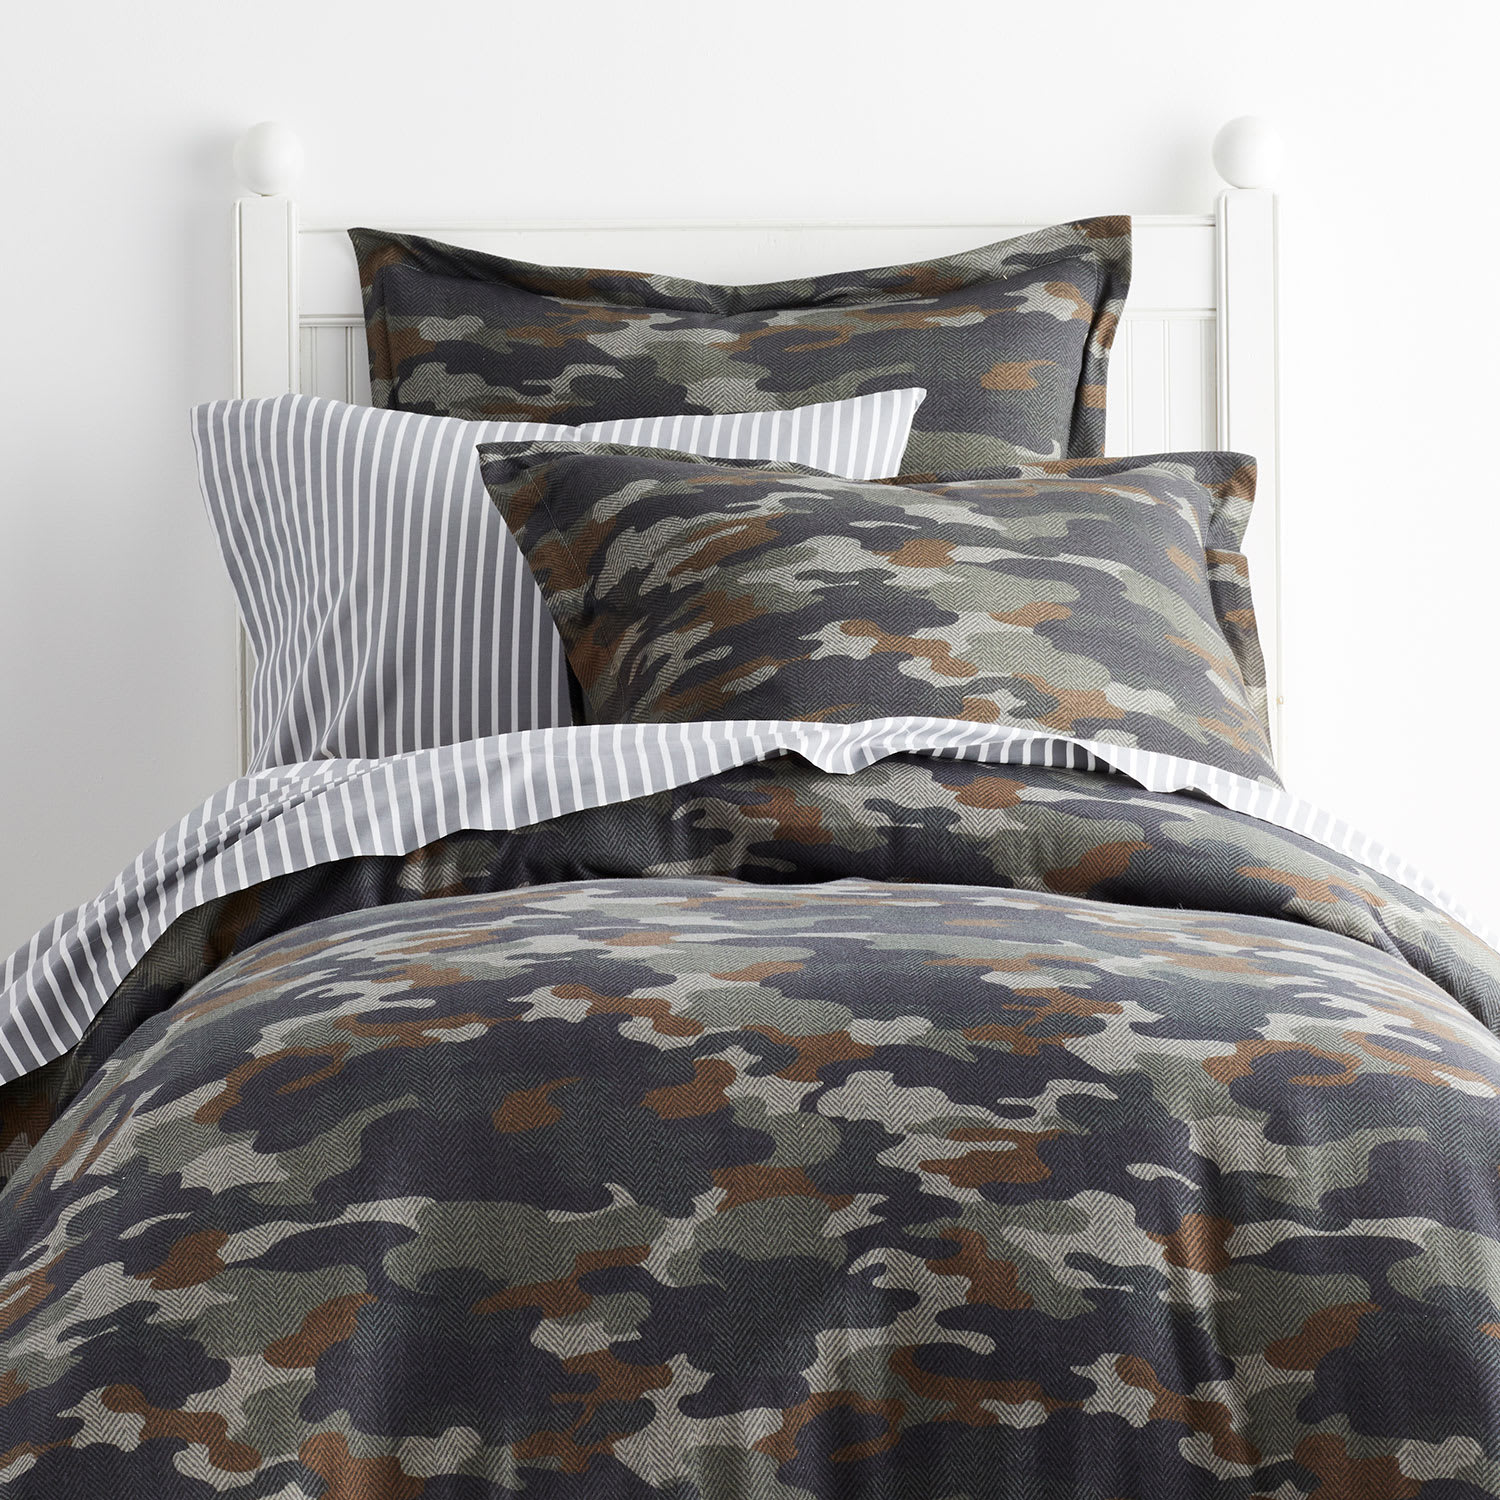 Camouflage Jersey Knit Duvet Cover - Multi